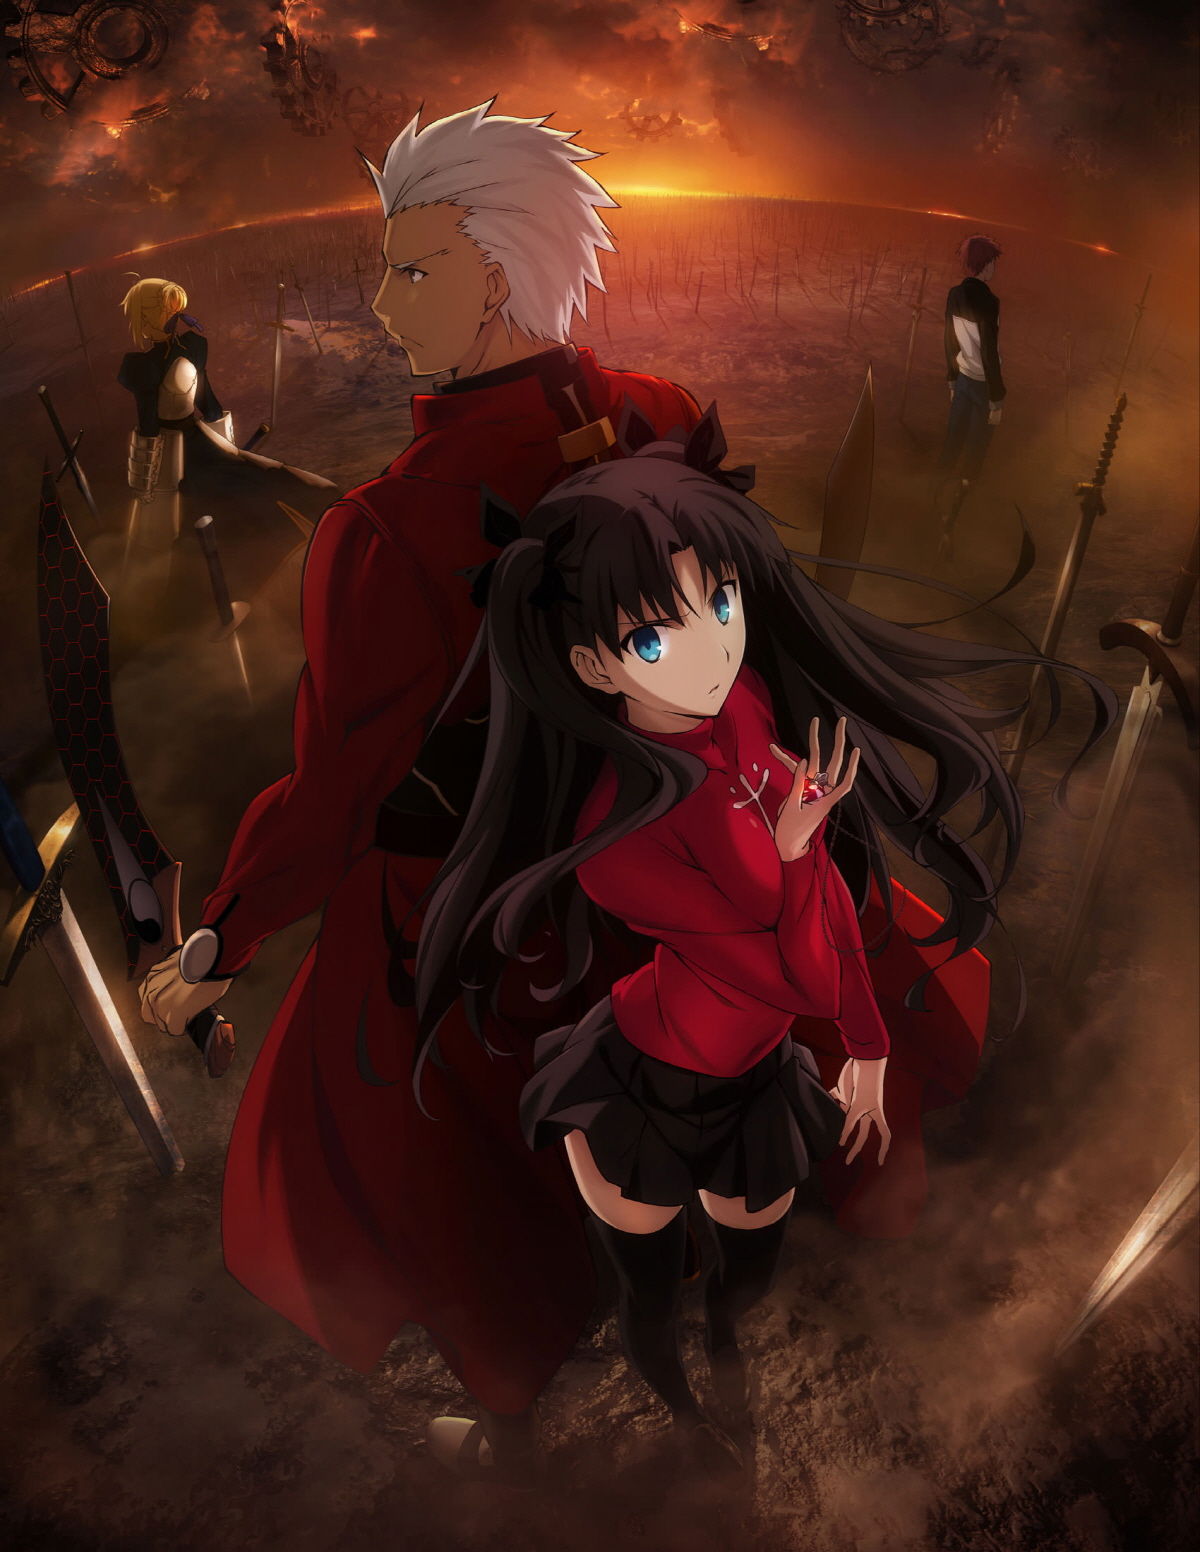 Fate stay night [Unlimited Blade Works] - 01. Unlimited Blade Works(페이트, 페스나, 리메이크)